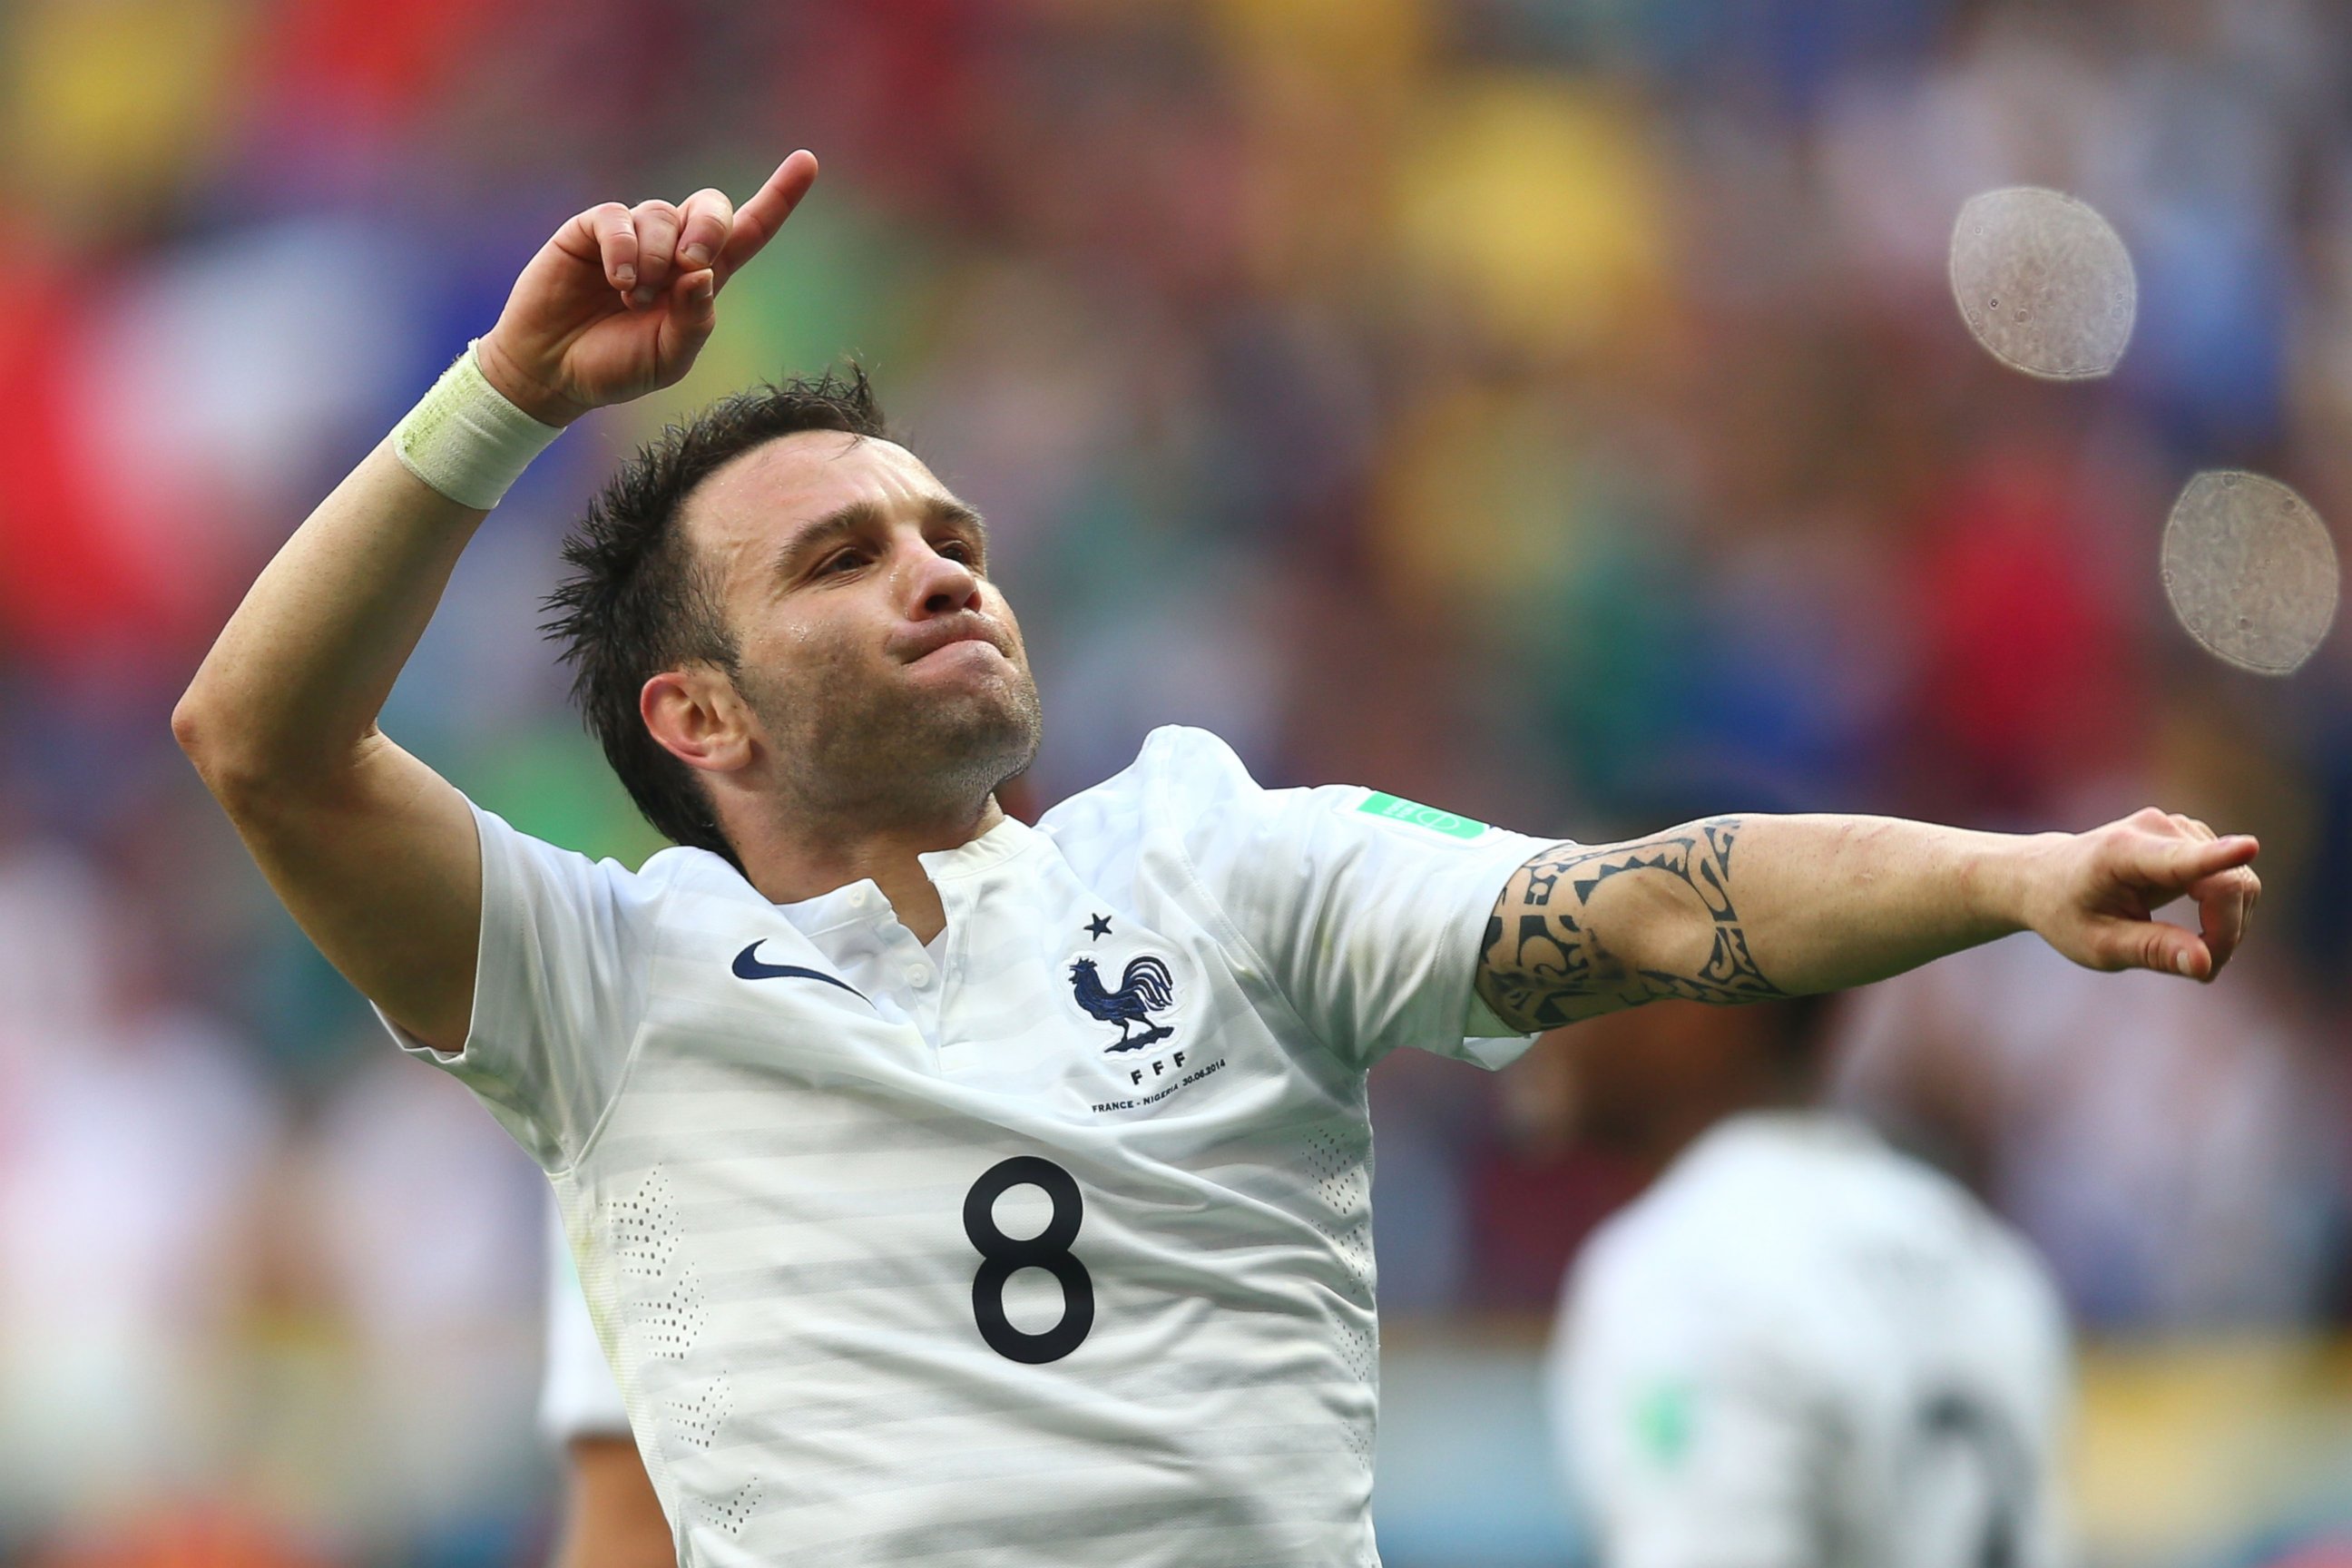 PHOTO: Mathieu Valbuena of France celebrates his team's secong goal during the 2014 FIFA World Cup Brazil Round of 16 match between France and Nigeria at Estadio Nacional on June 30, 2014 in Brasilia, Brazil. 